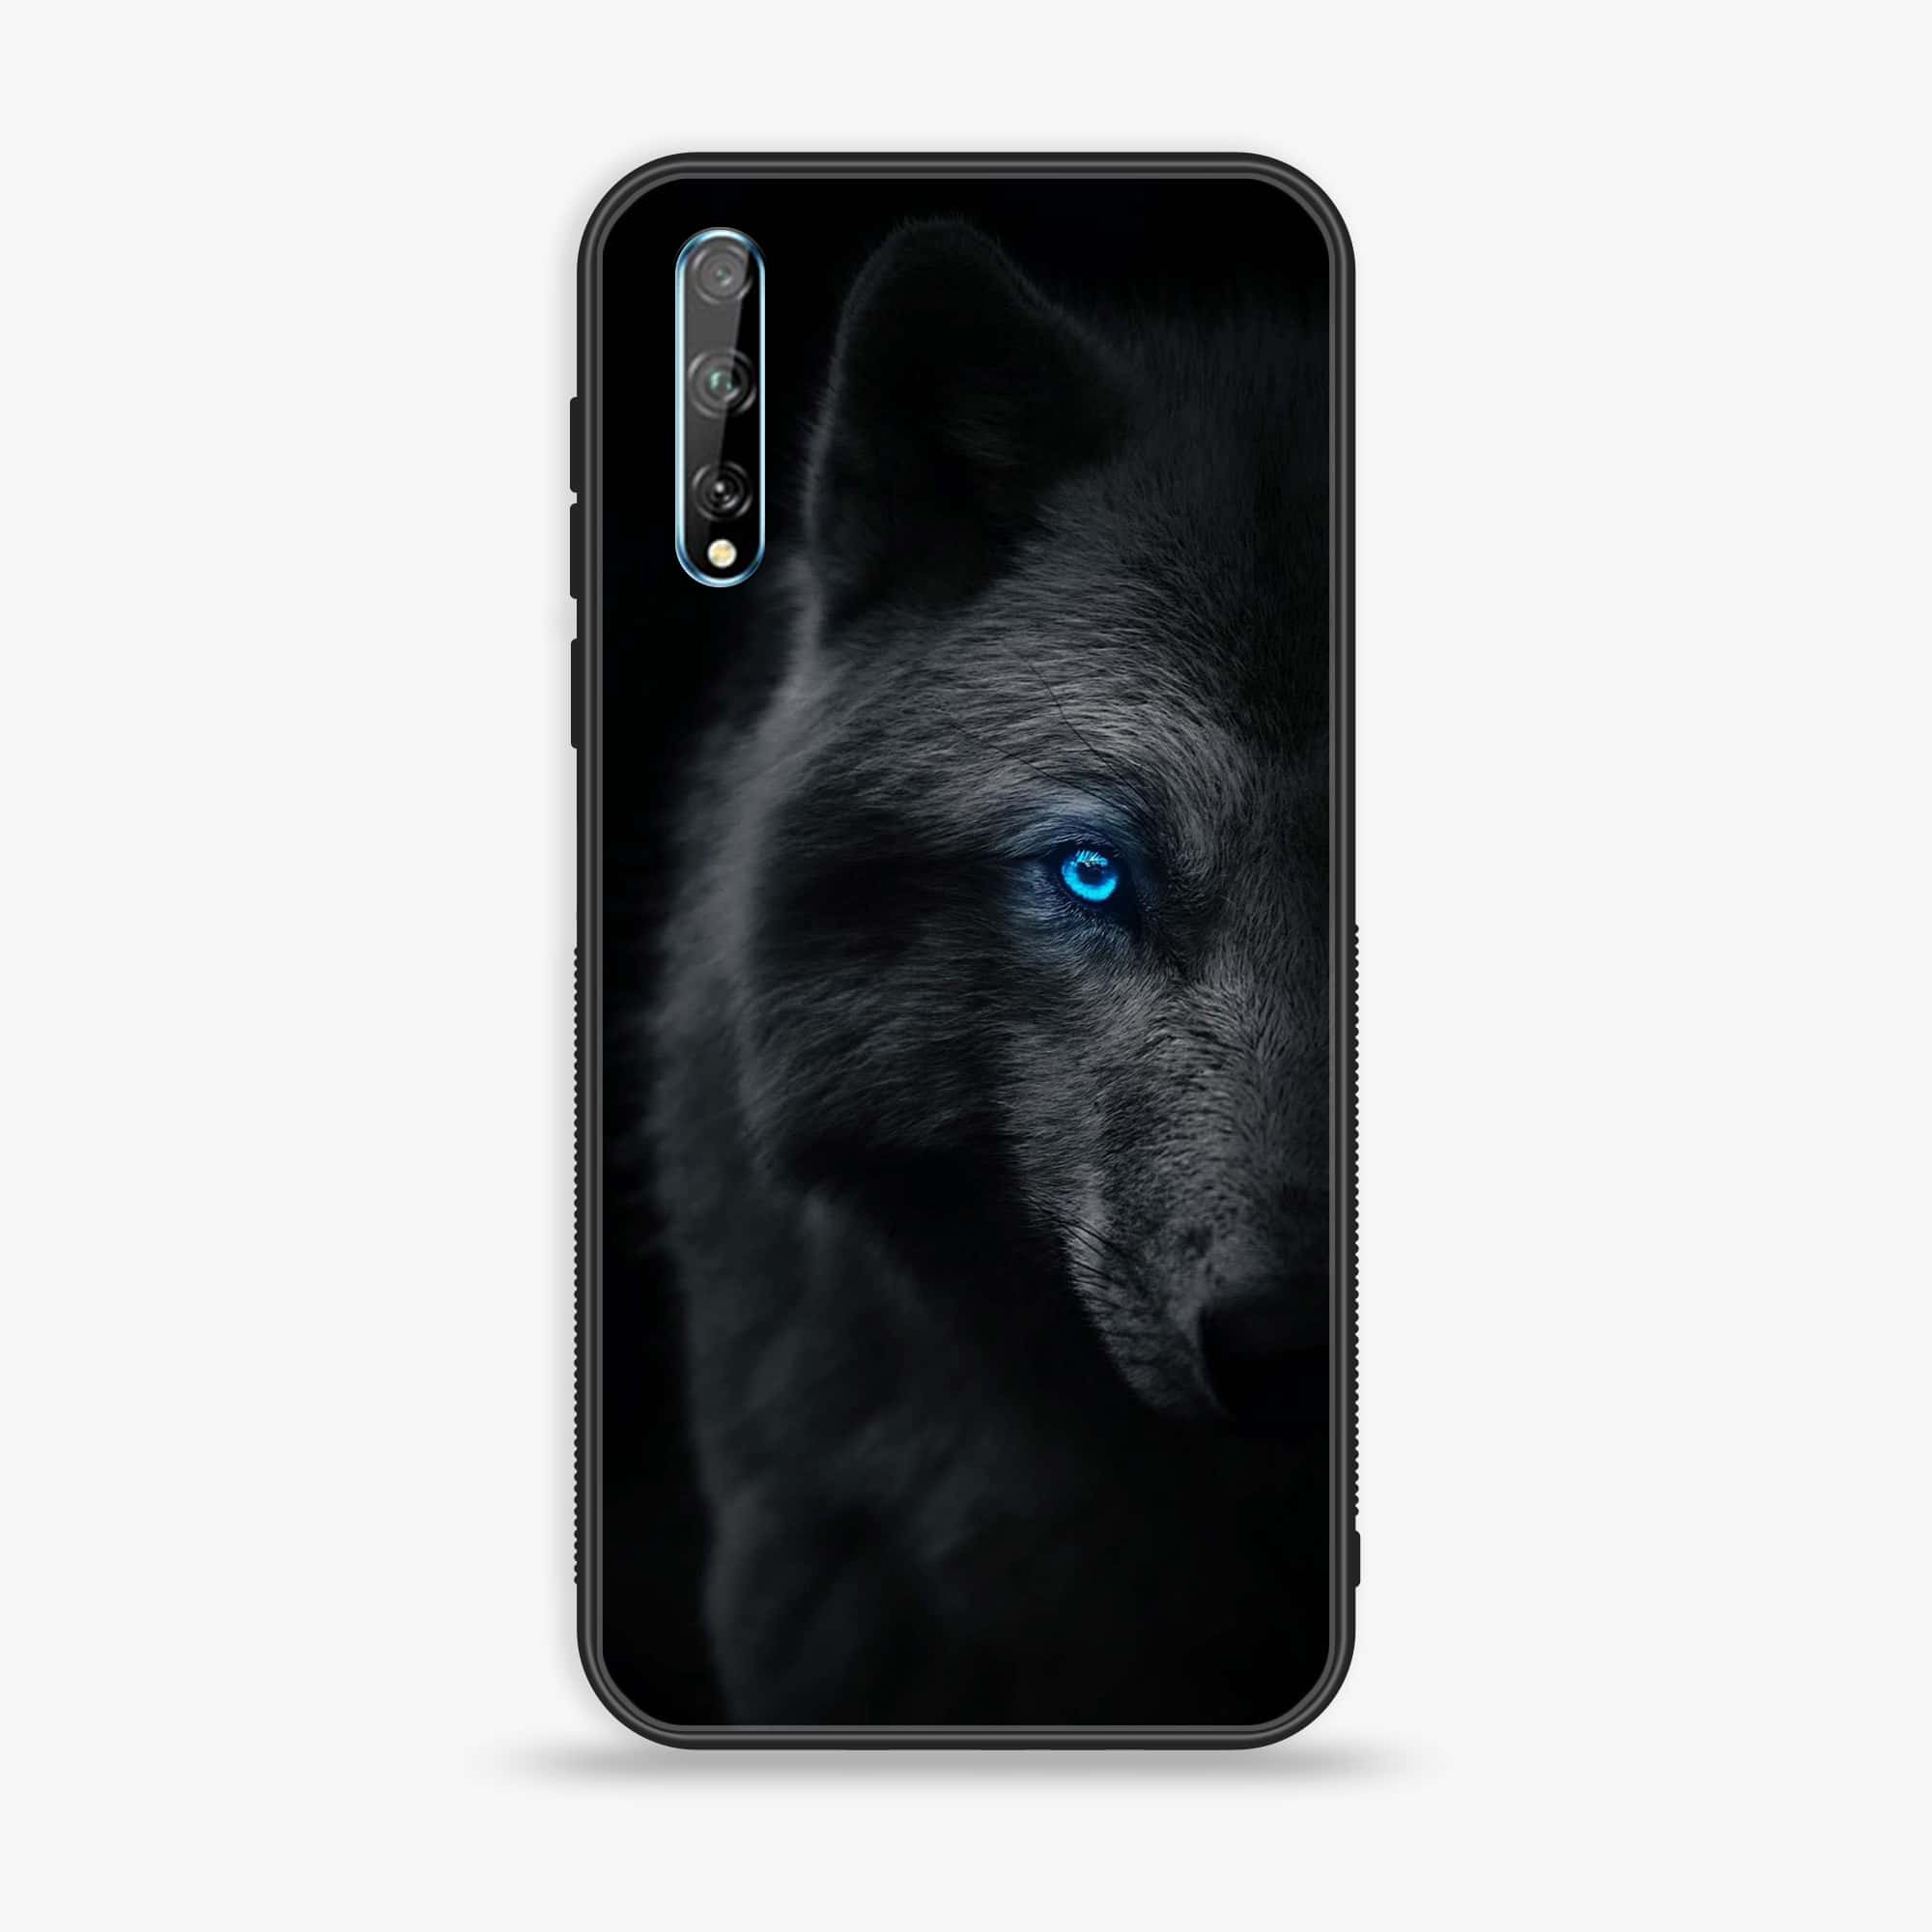 Huawei Y8p - Wolf Series - Premium Printed Glass soft Bumper shock Proof Case